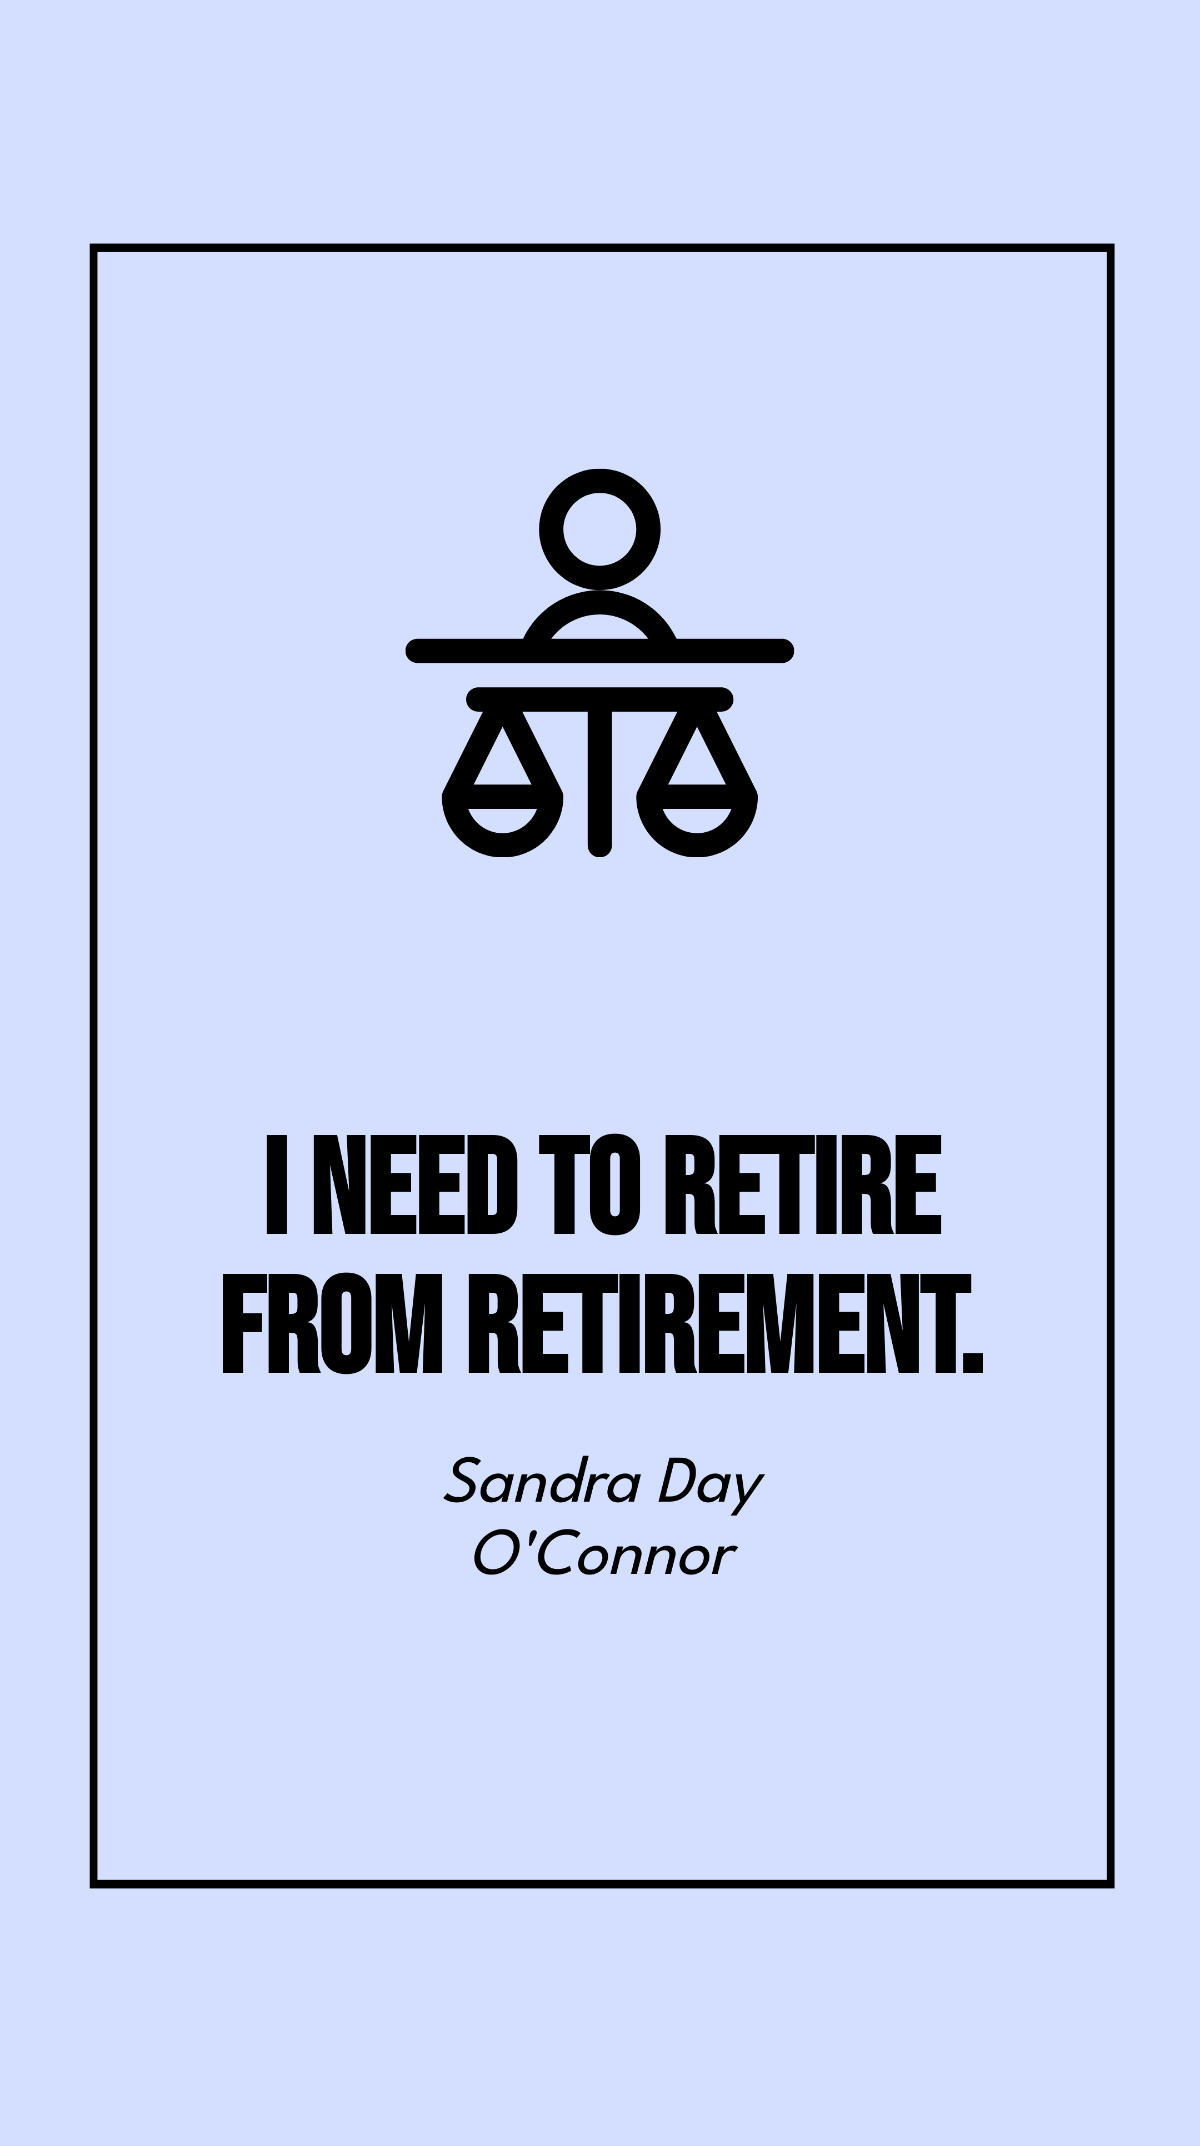 Sandra Day O'Connor - I need to retire from retirement. Template